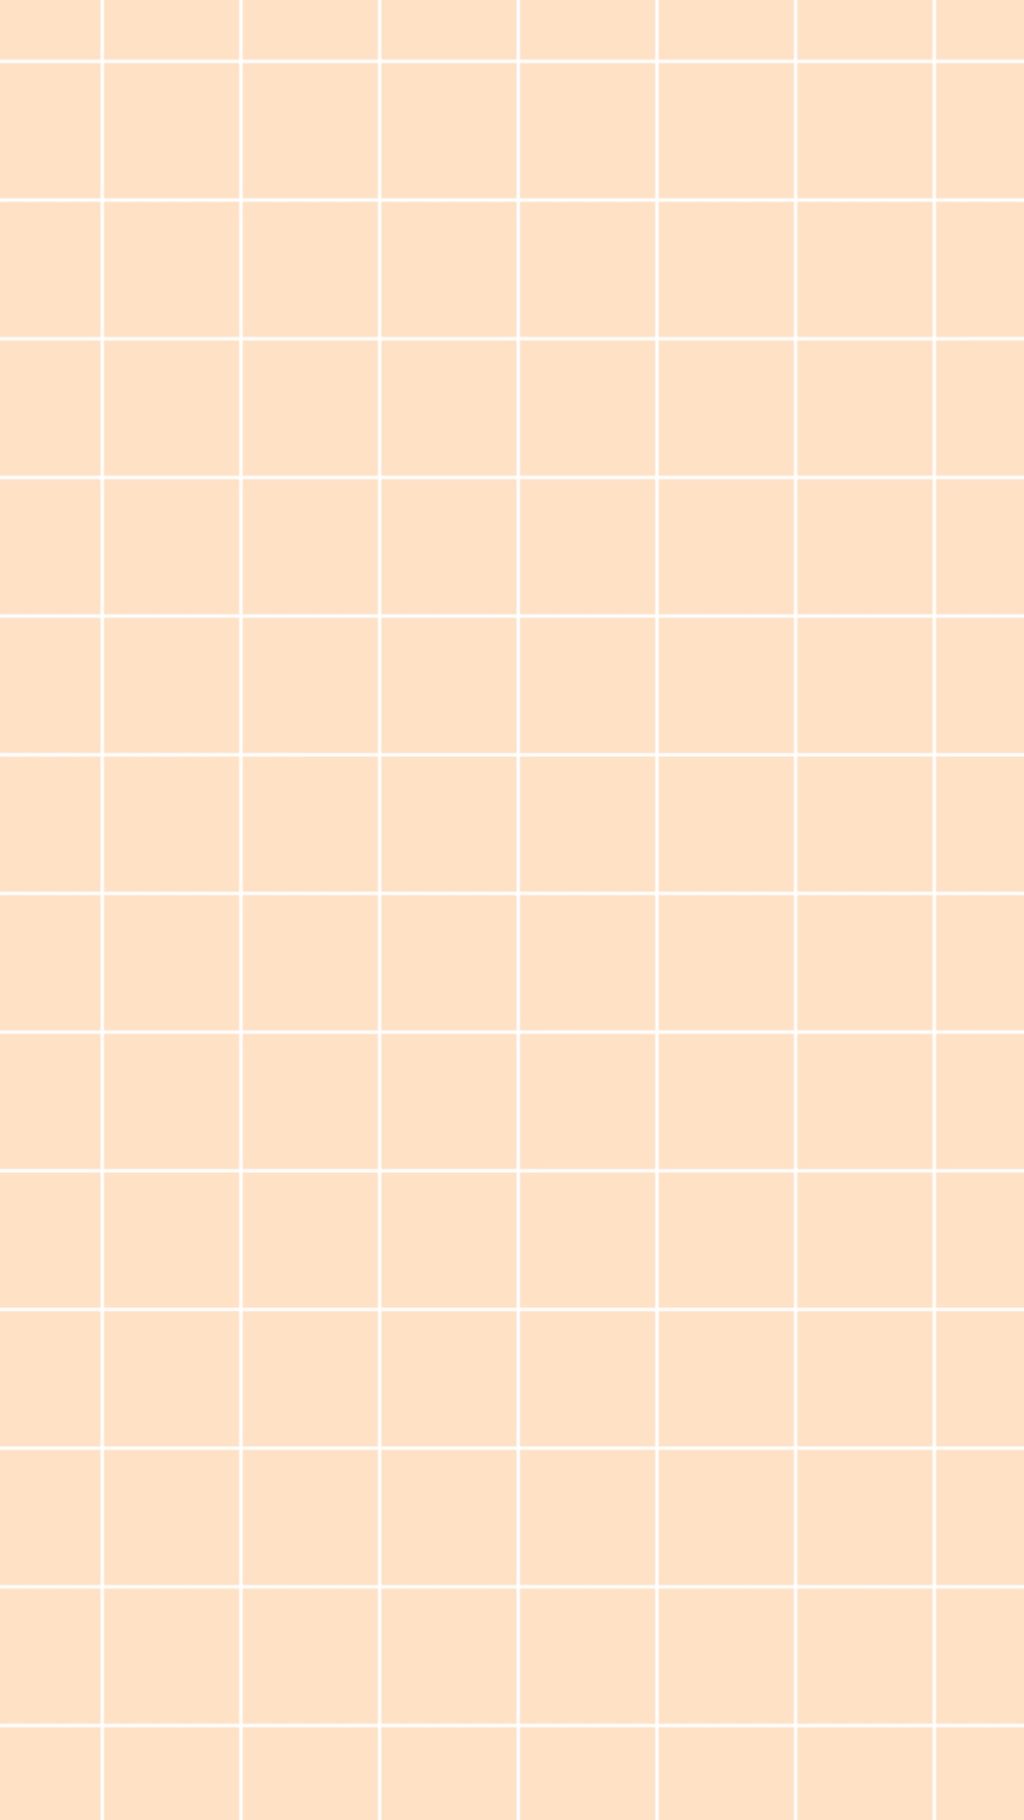 A pink and white checkerboard pattern - Grid